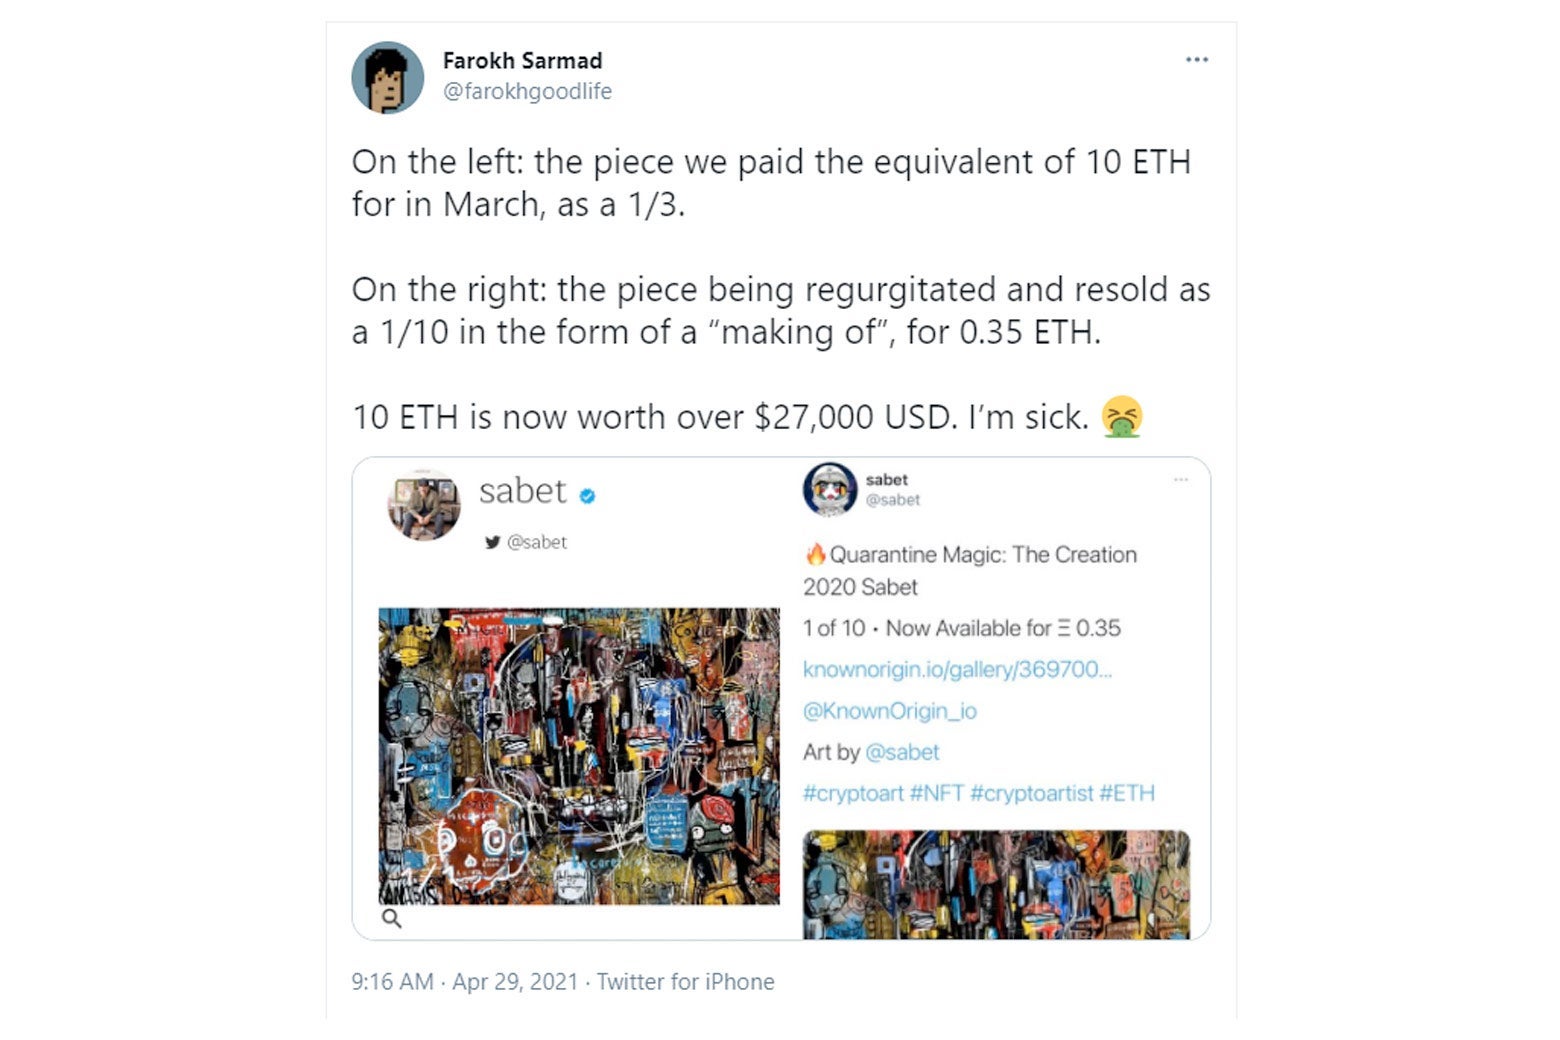 A tweet says: "On the left: the piece we paid the equivalent of 10 ETH for in March, as a 1/3. On the right: the piece being regurgitated and resold as a 1/10 in the form of a 'making of', for .35 ETH. 10 ETH is now worth over $27,000 USD. I'm sick." Barfing emoji.